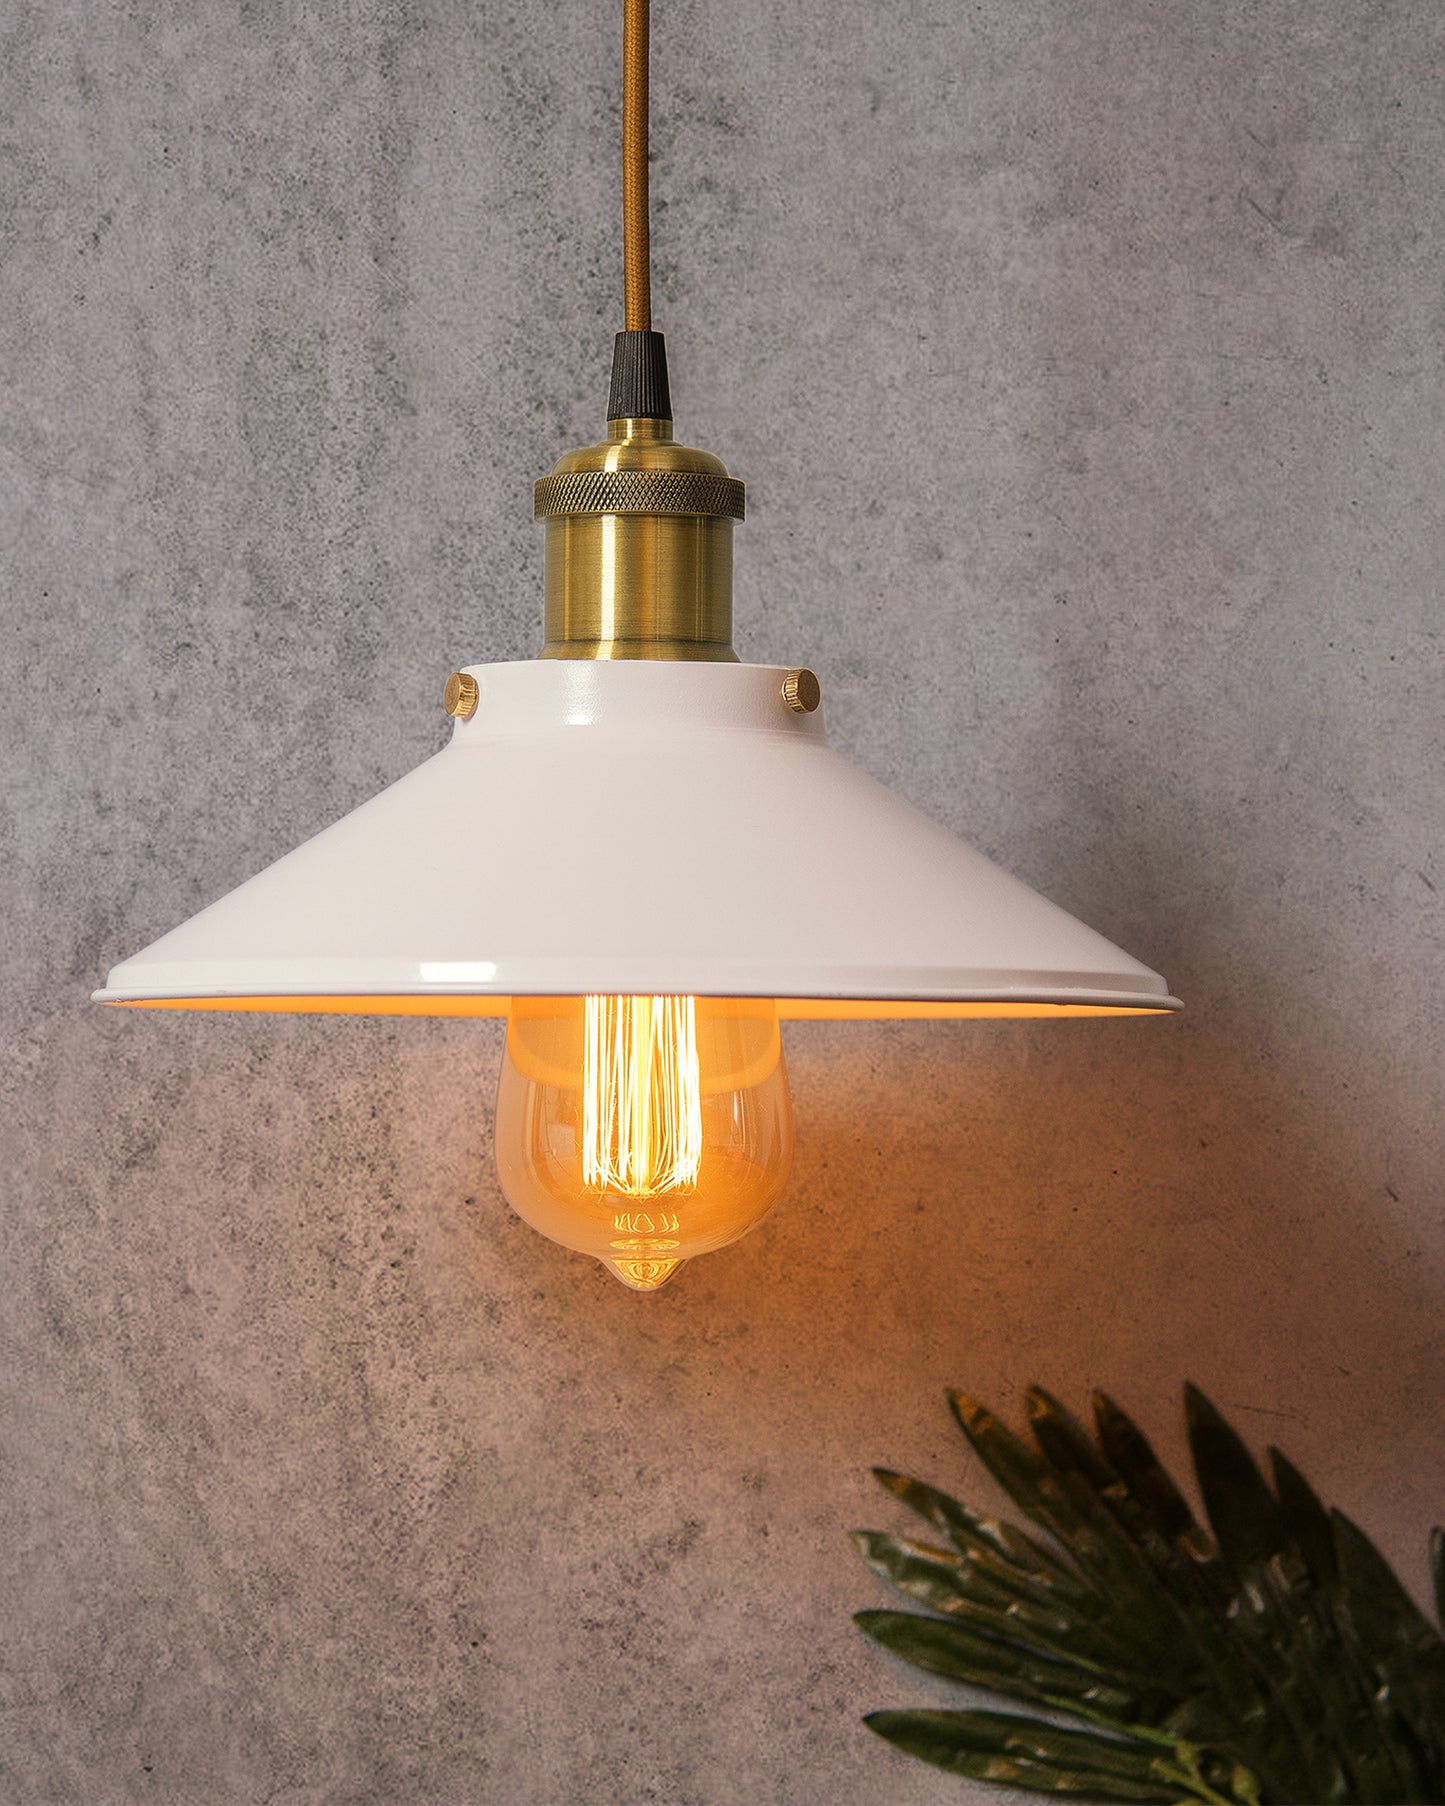 Single White Cone Pendant with Antique Holder, E27, Modern Nordic Hanging Ceiling Light (Bulb Included)